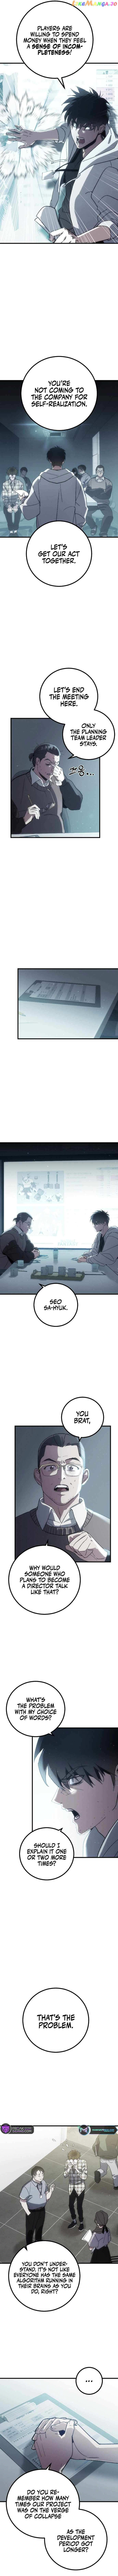 Was Manager Seo disposed of as an industrial accident? Chapter 1 - page 6